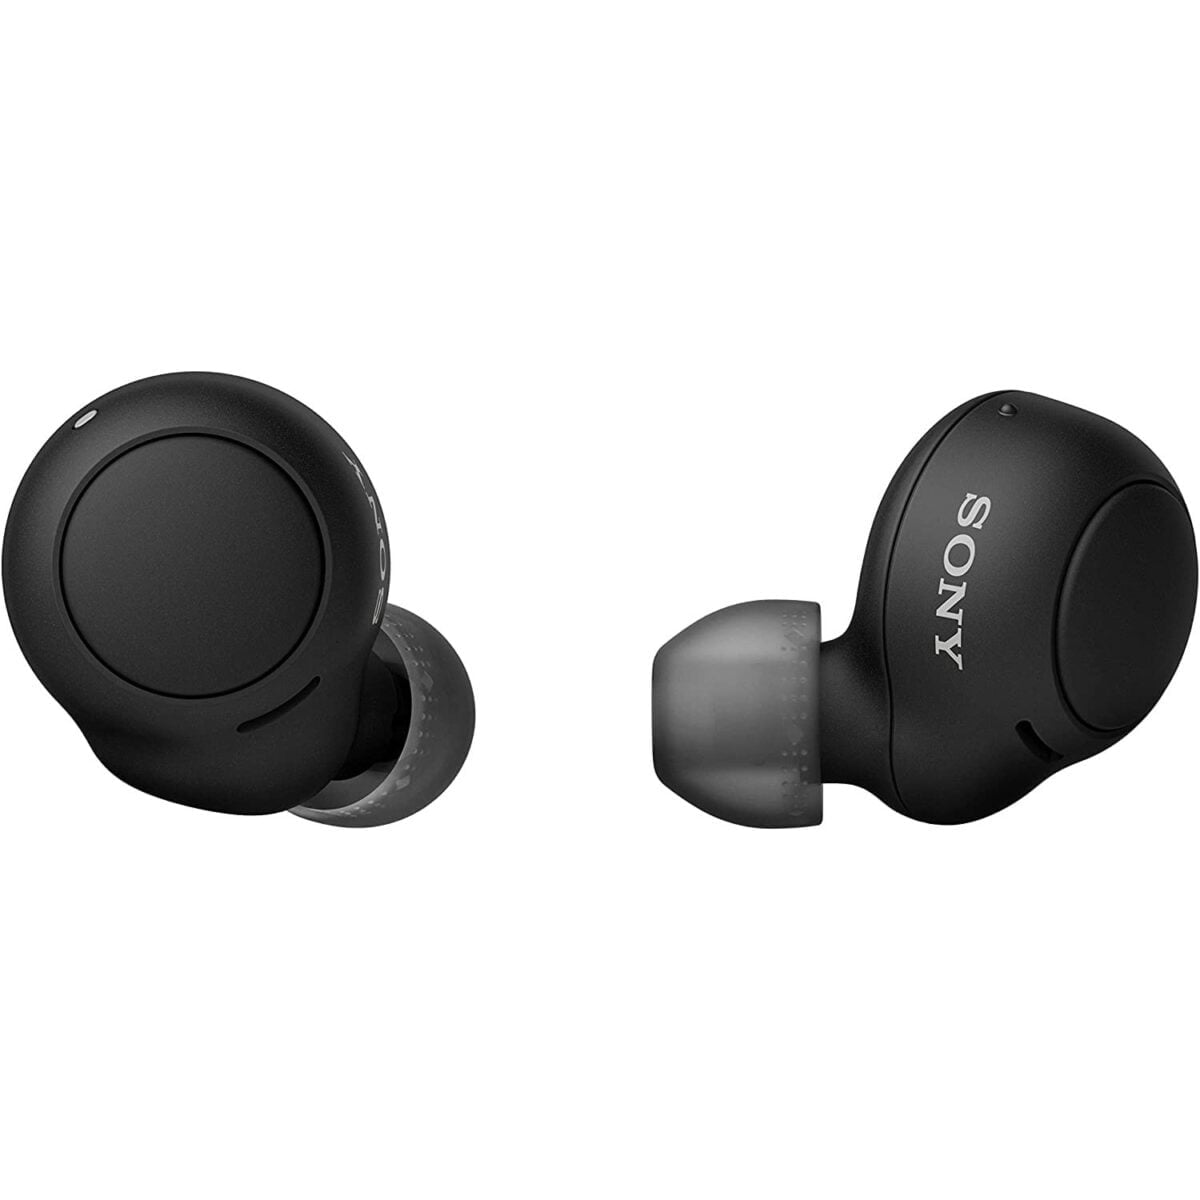 Sony WF C500 Bluetooth Truly Wireless in Ear Earbuds Black 1 Shop Mobile Accessories Online in India